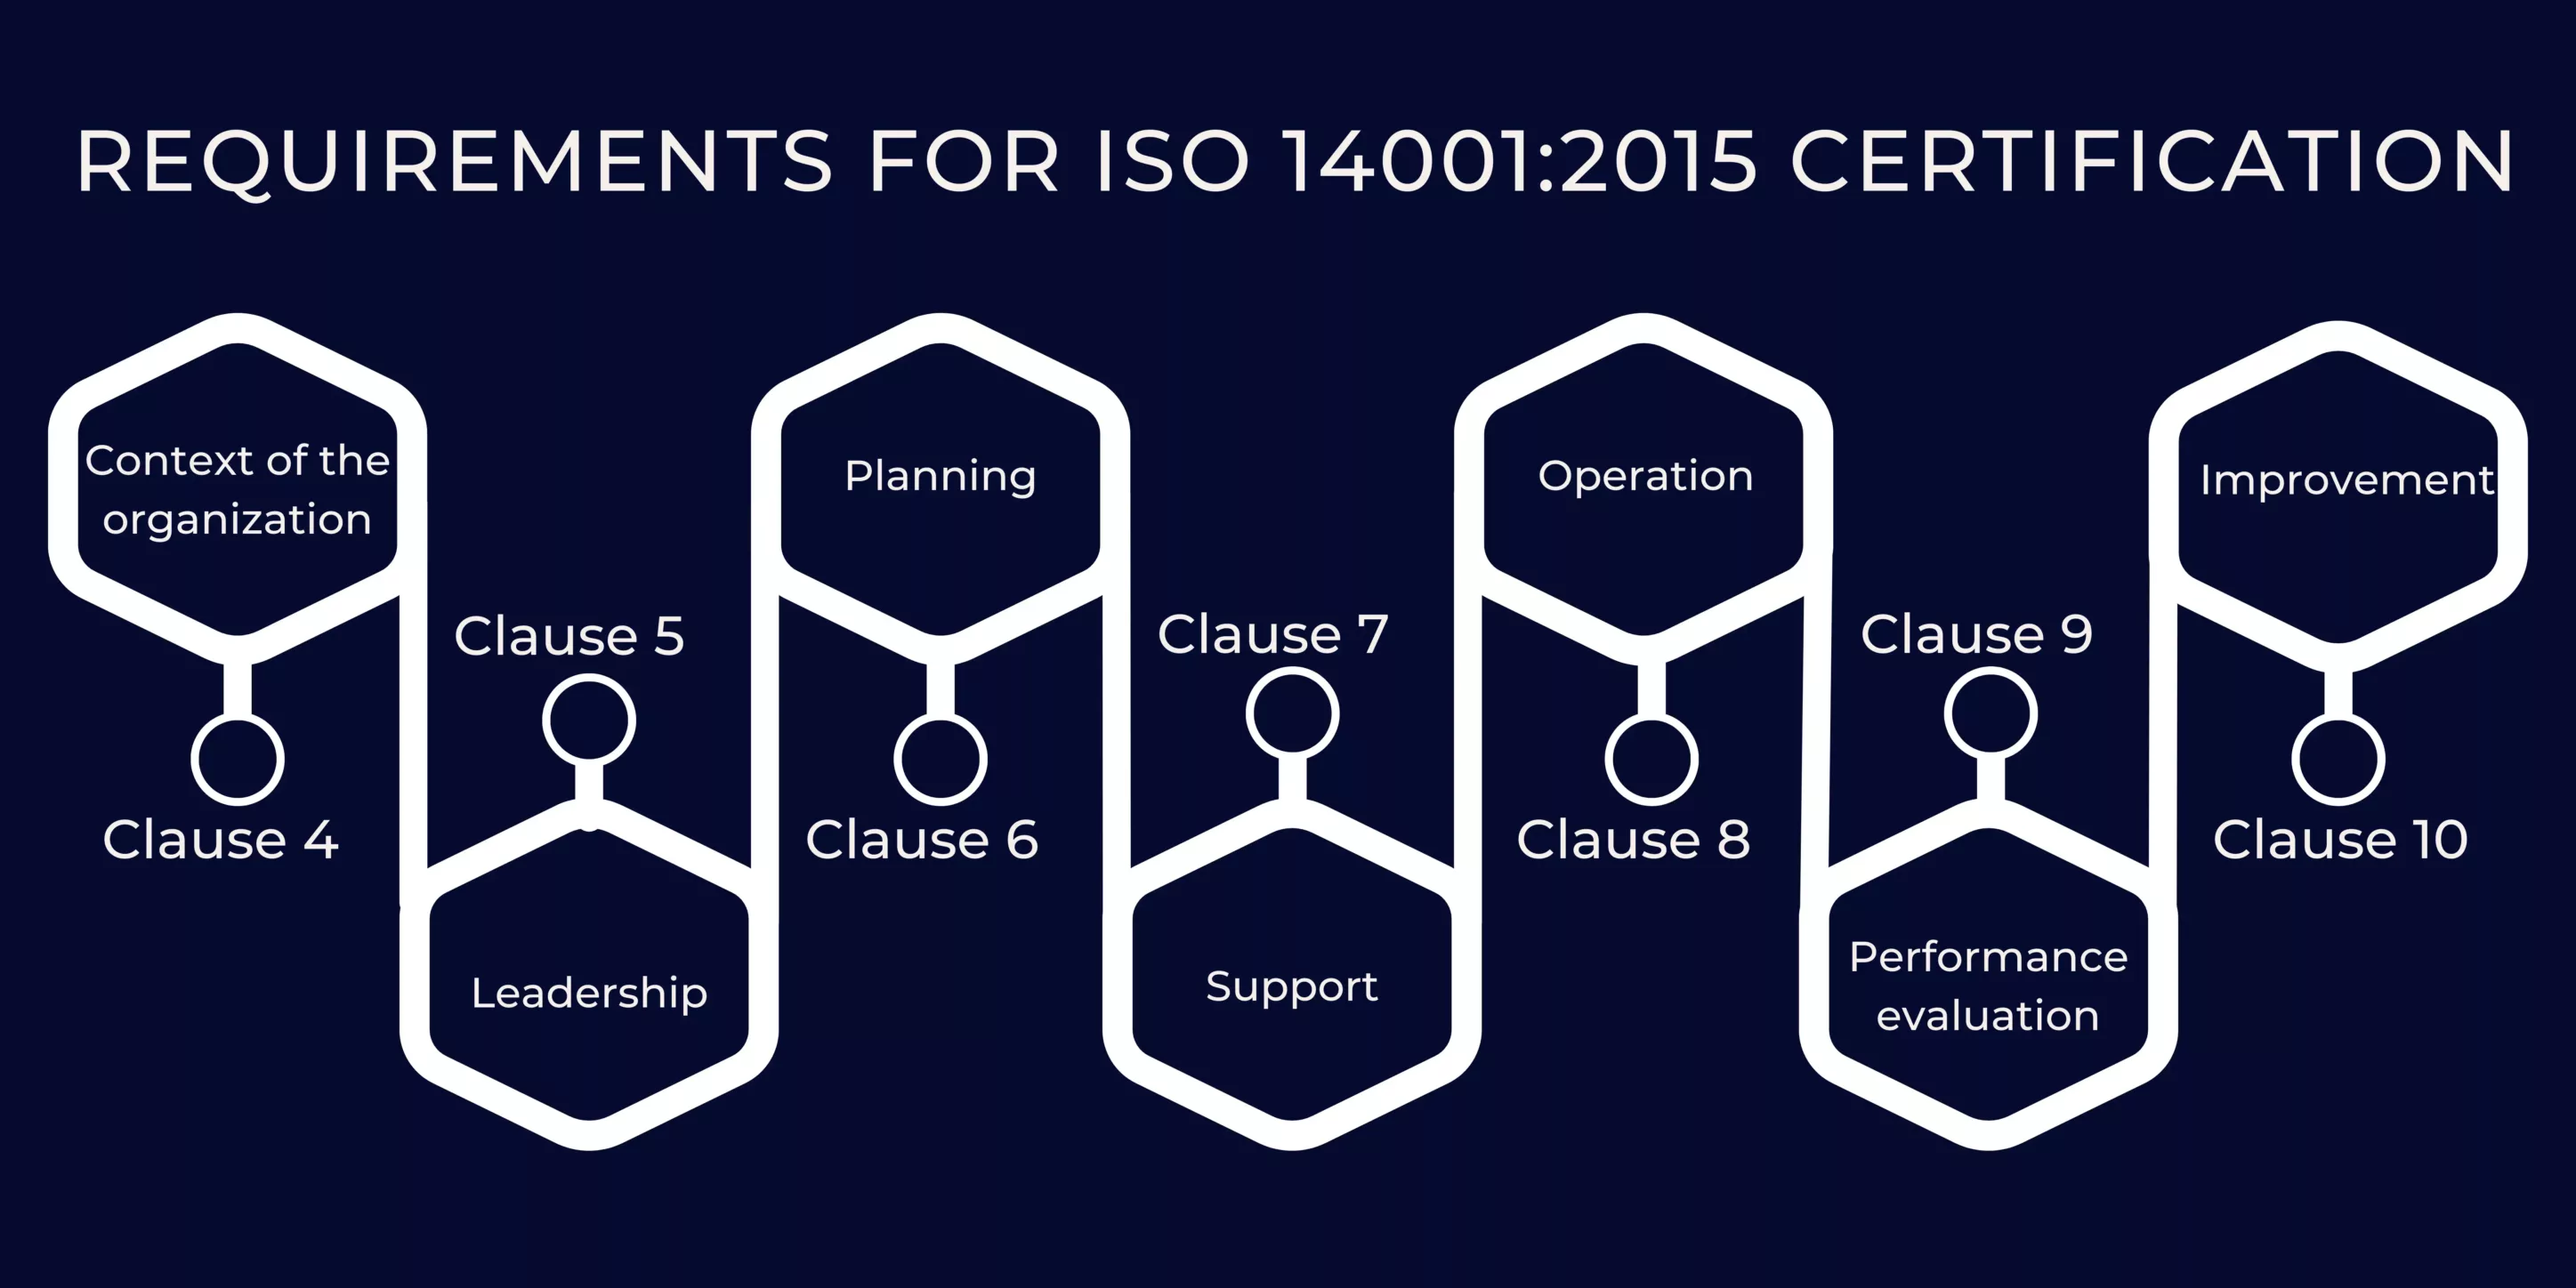 REQUIREMENTS FOR ISO 14001 2015